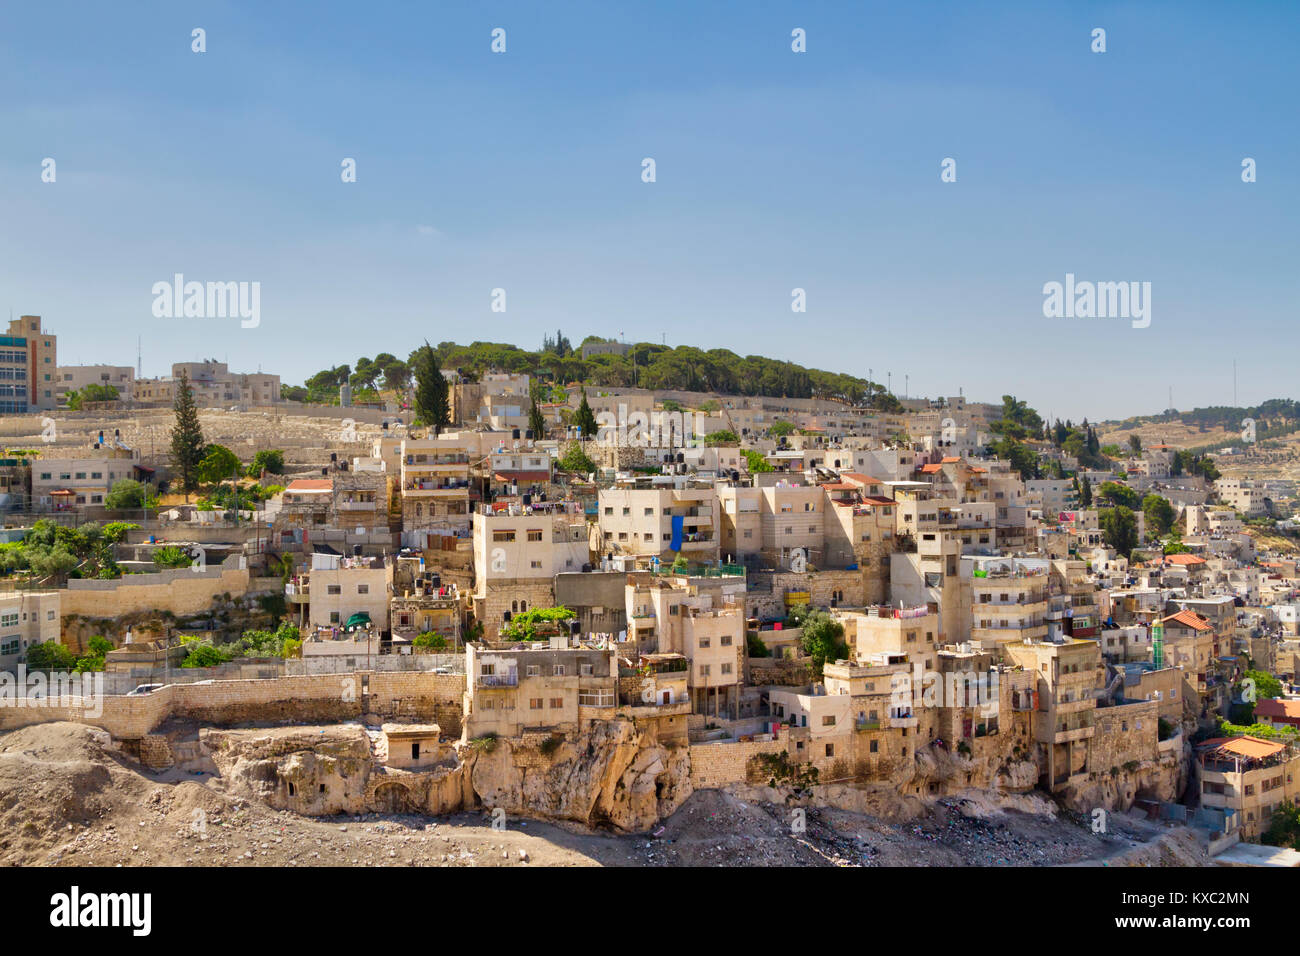 Panoramic View Of Jerusalem Neighborhood With Old Houses Carved In